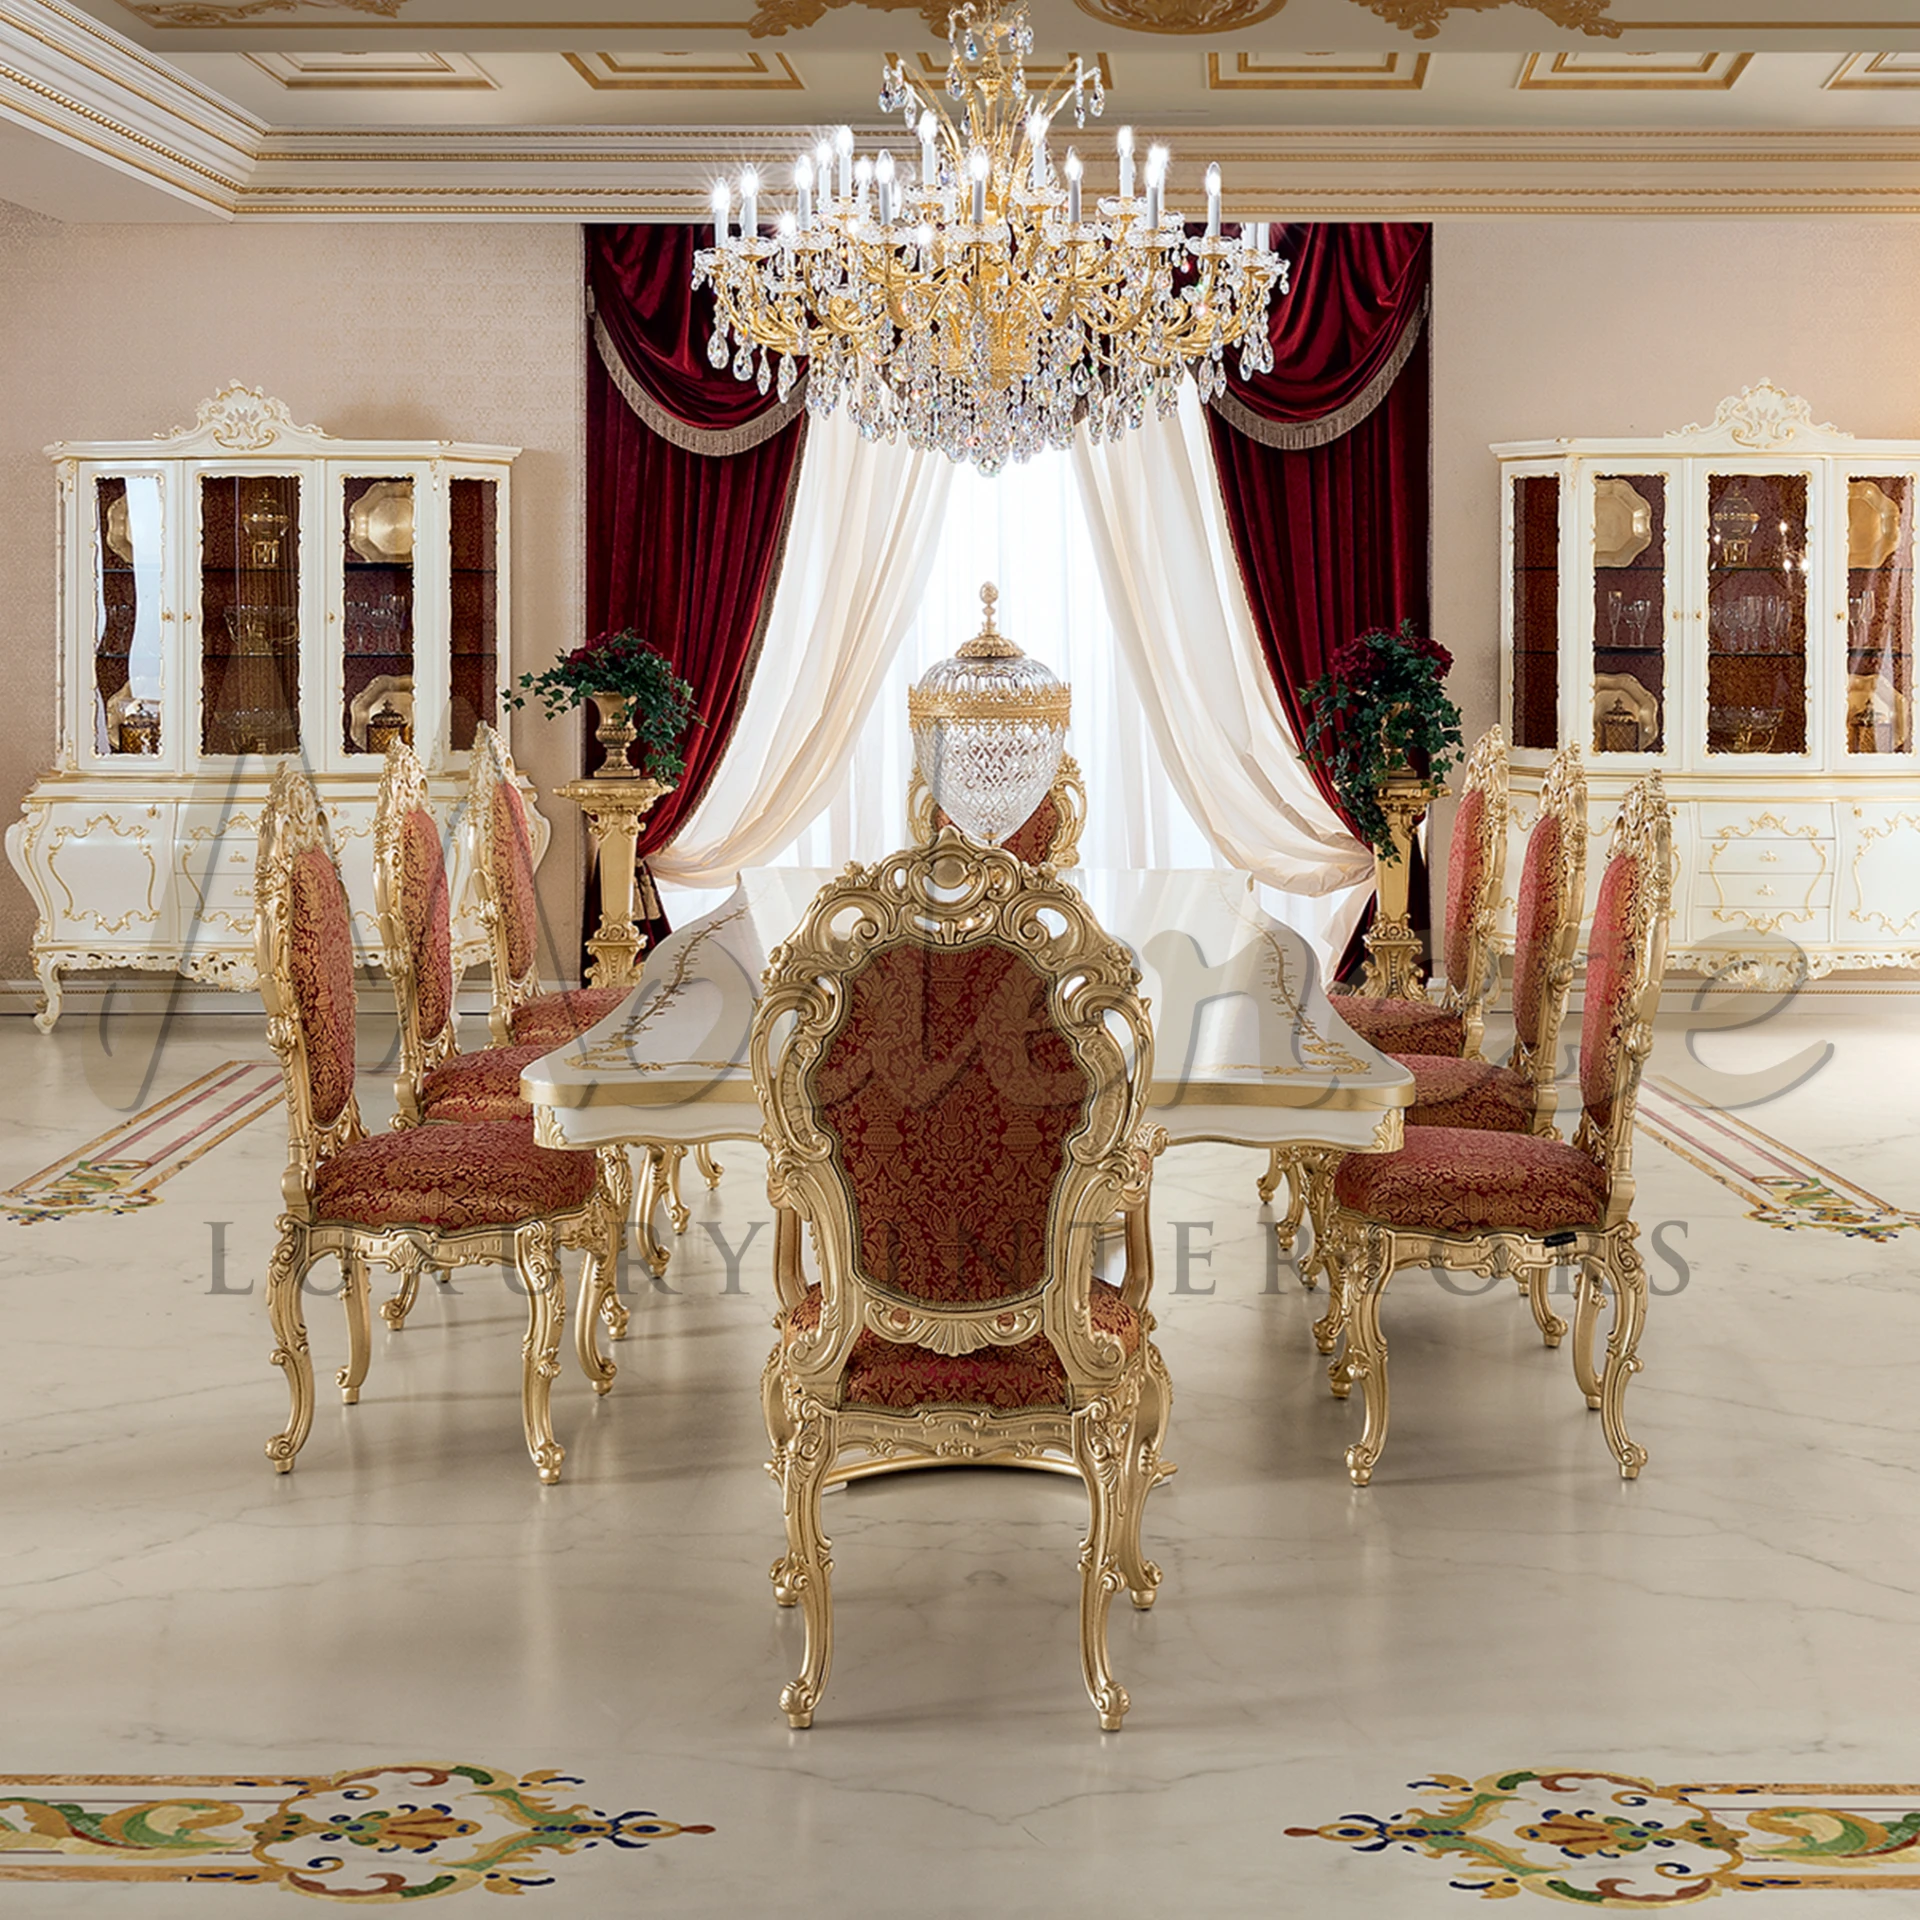 Luxurious dining space featured by a lavish chandelier, fancy golden chairs, and sophisticated white cabinet